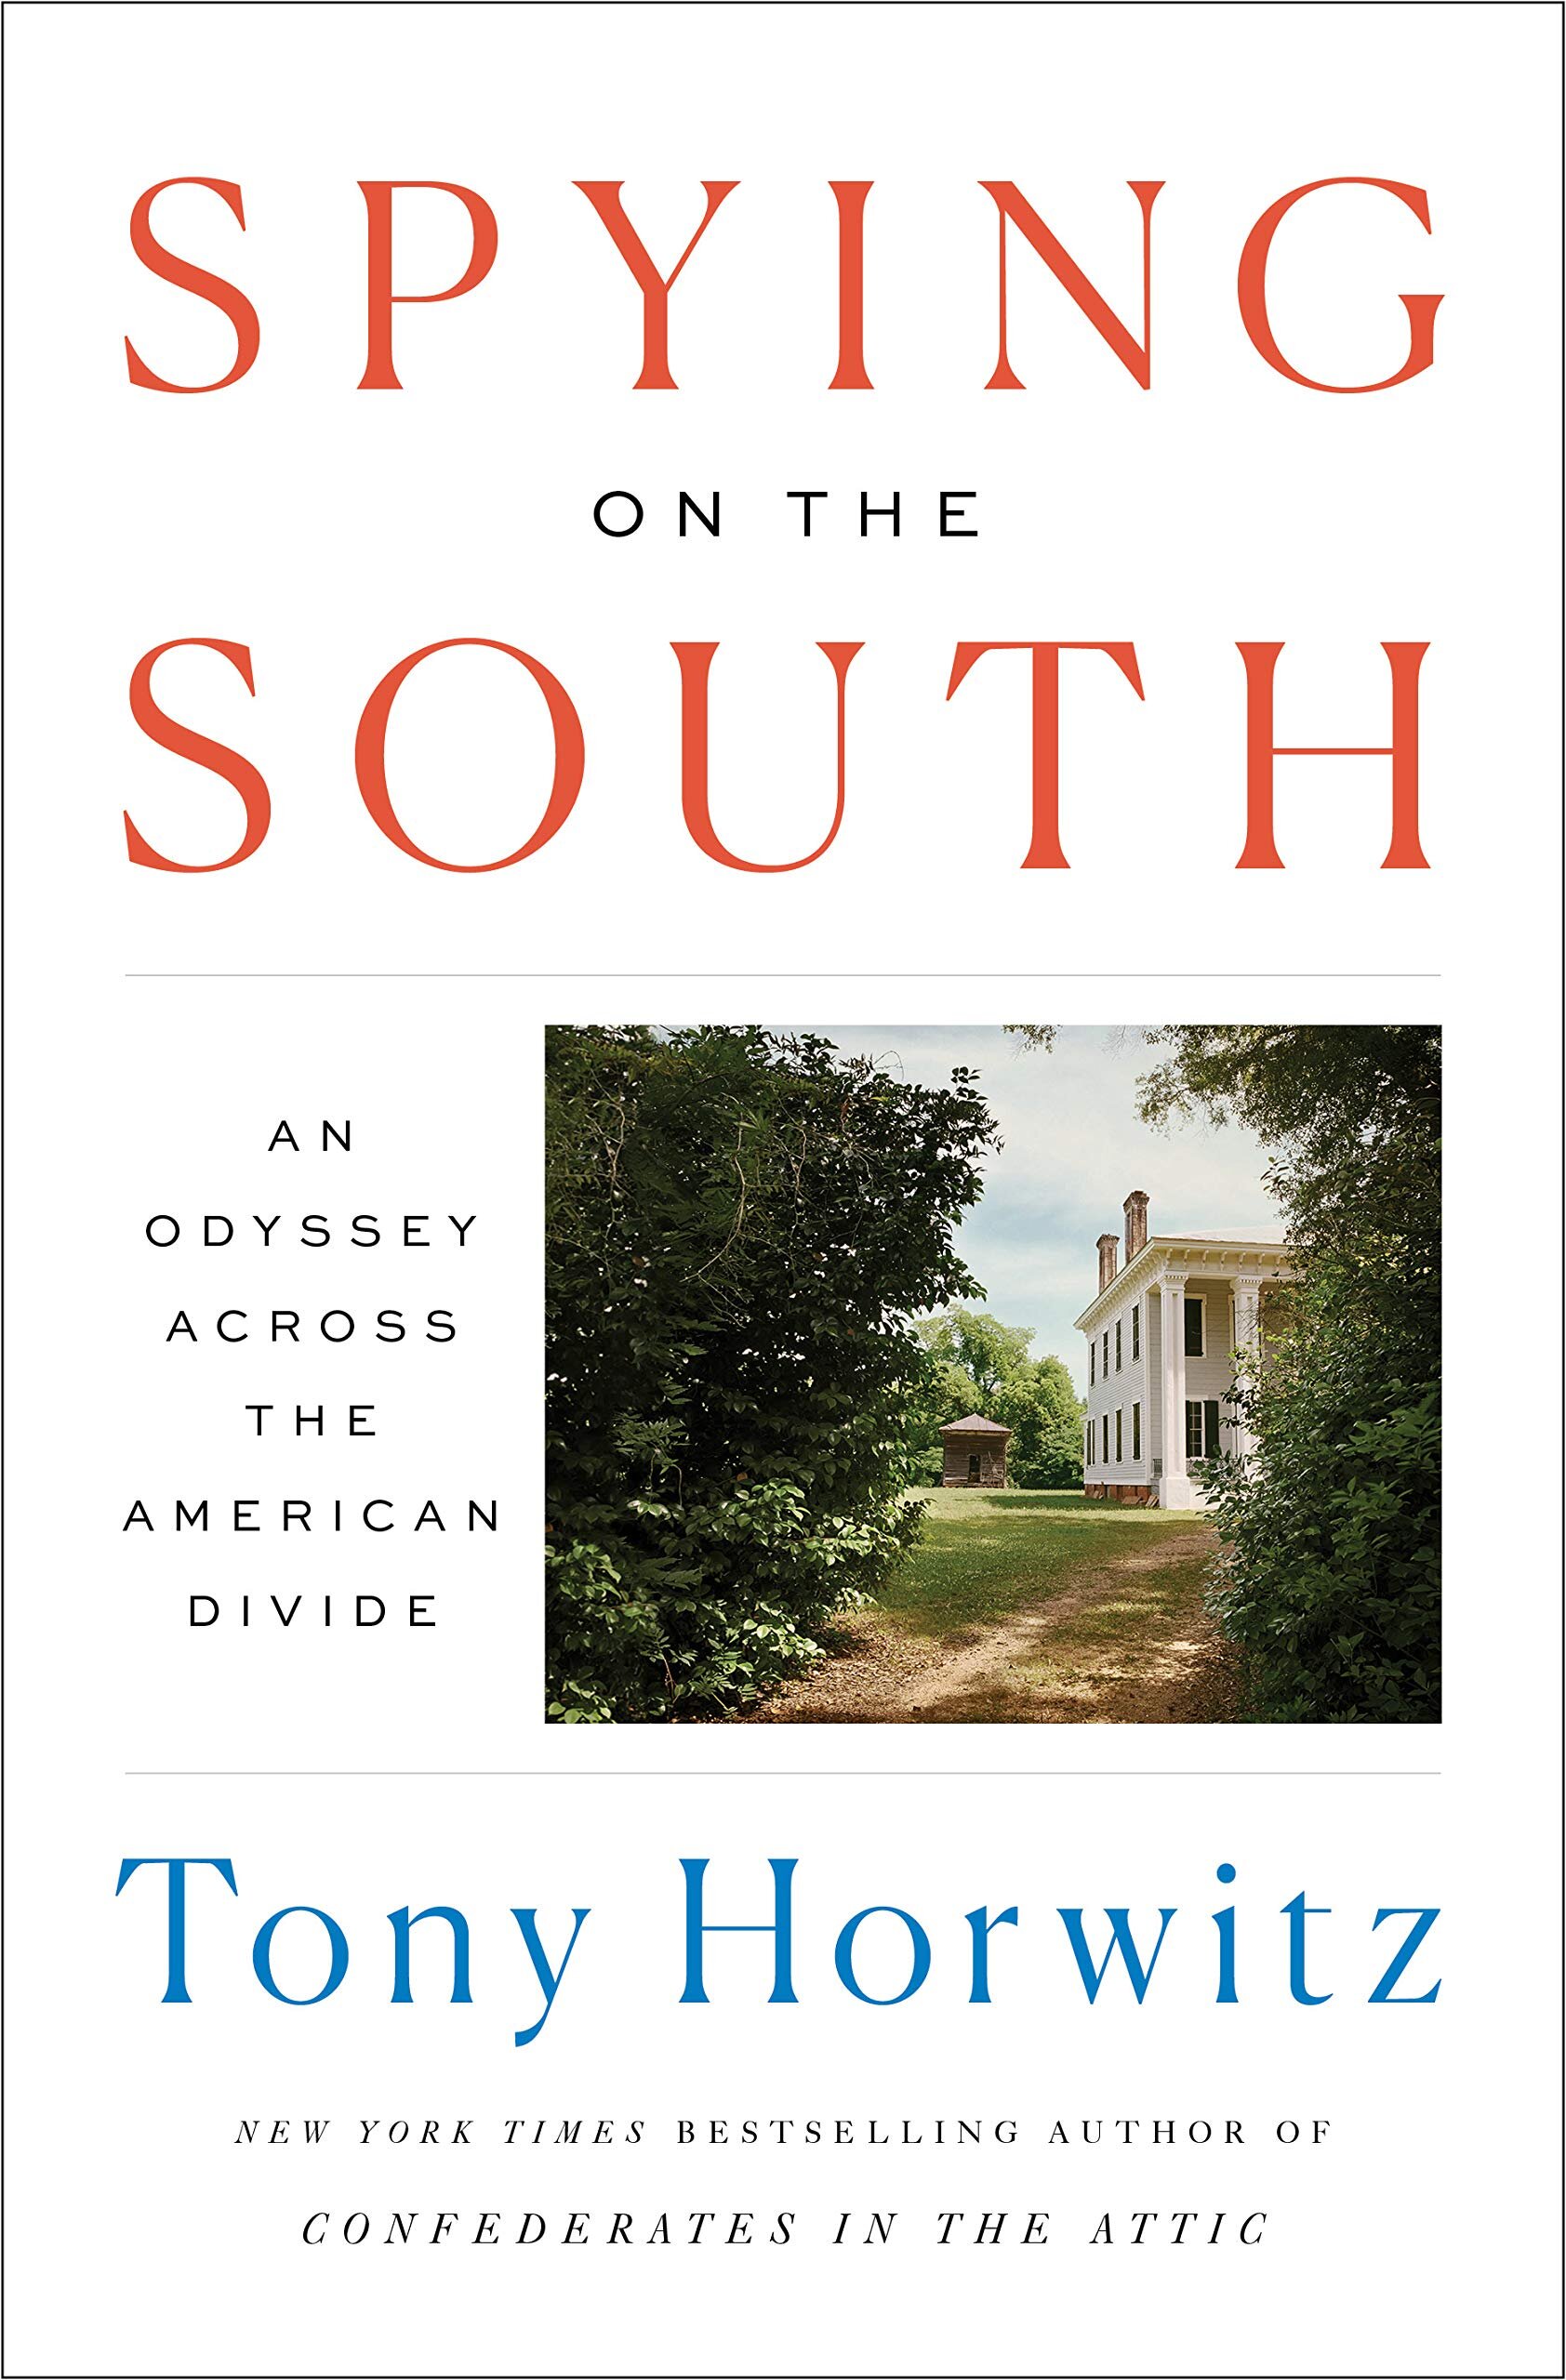 Best Nonfiction Spying on the South An Odyssey Across the American Divice by Tony Horwitz.jpg